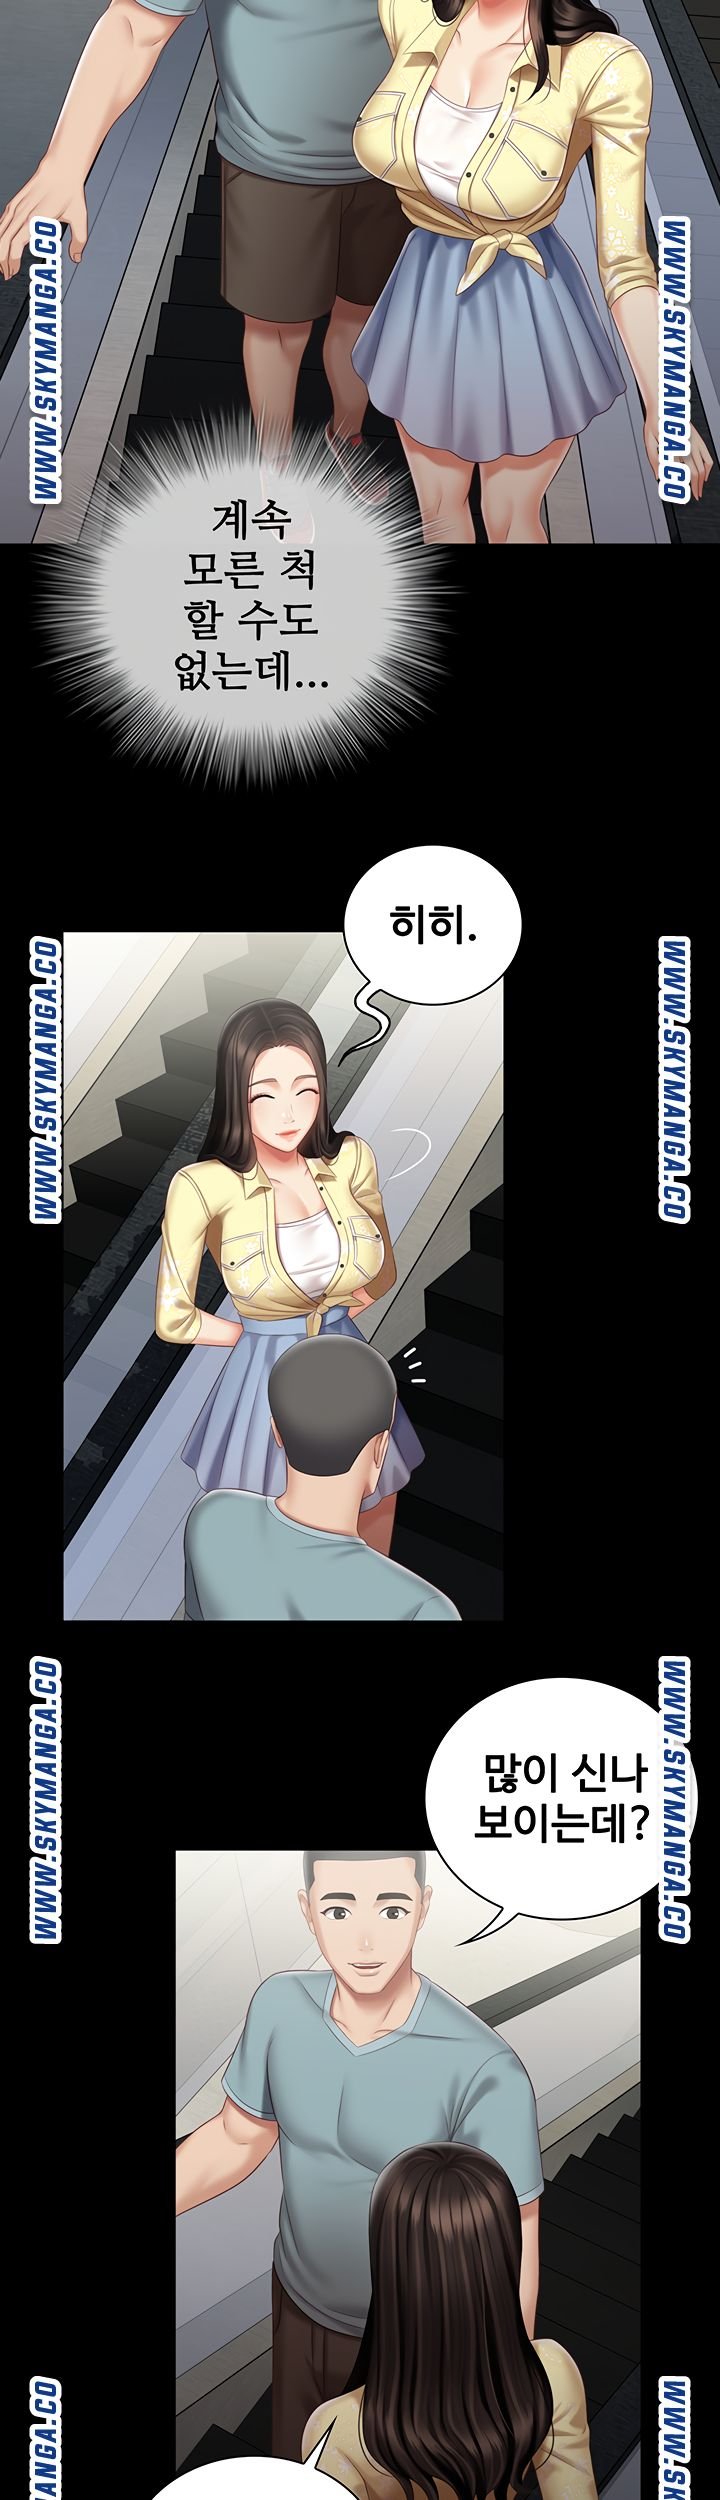 Sister’s Duty Raw - Chapter 69 Page 6